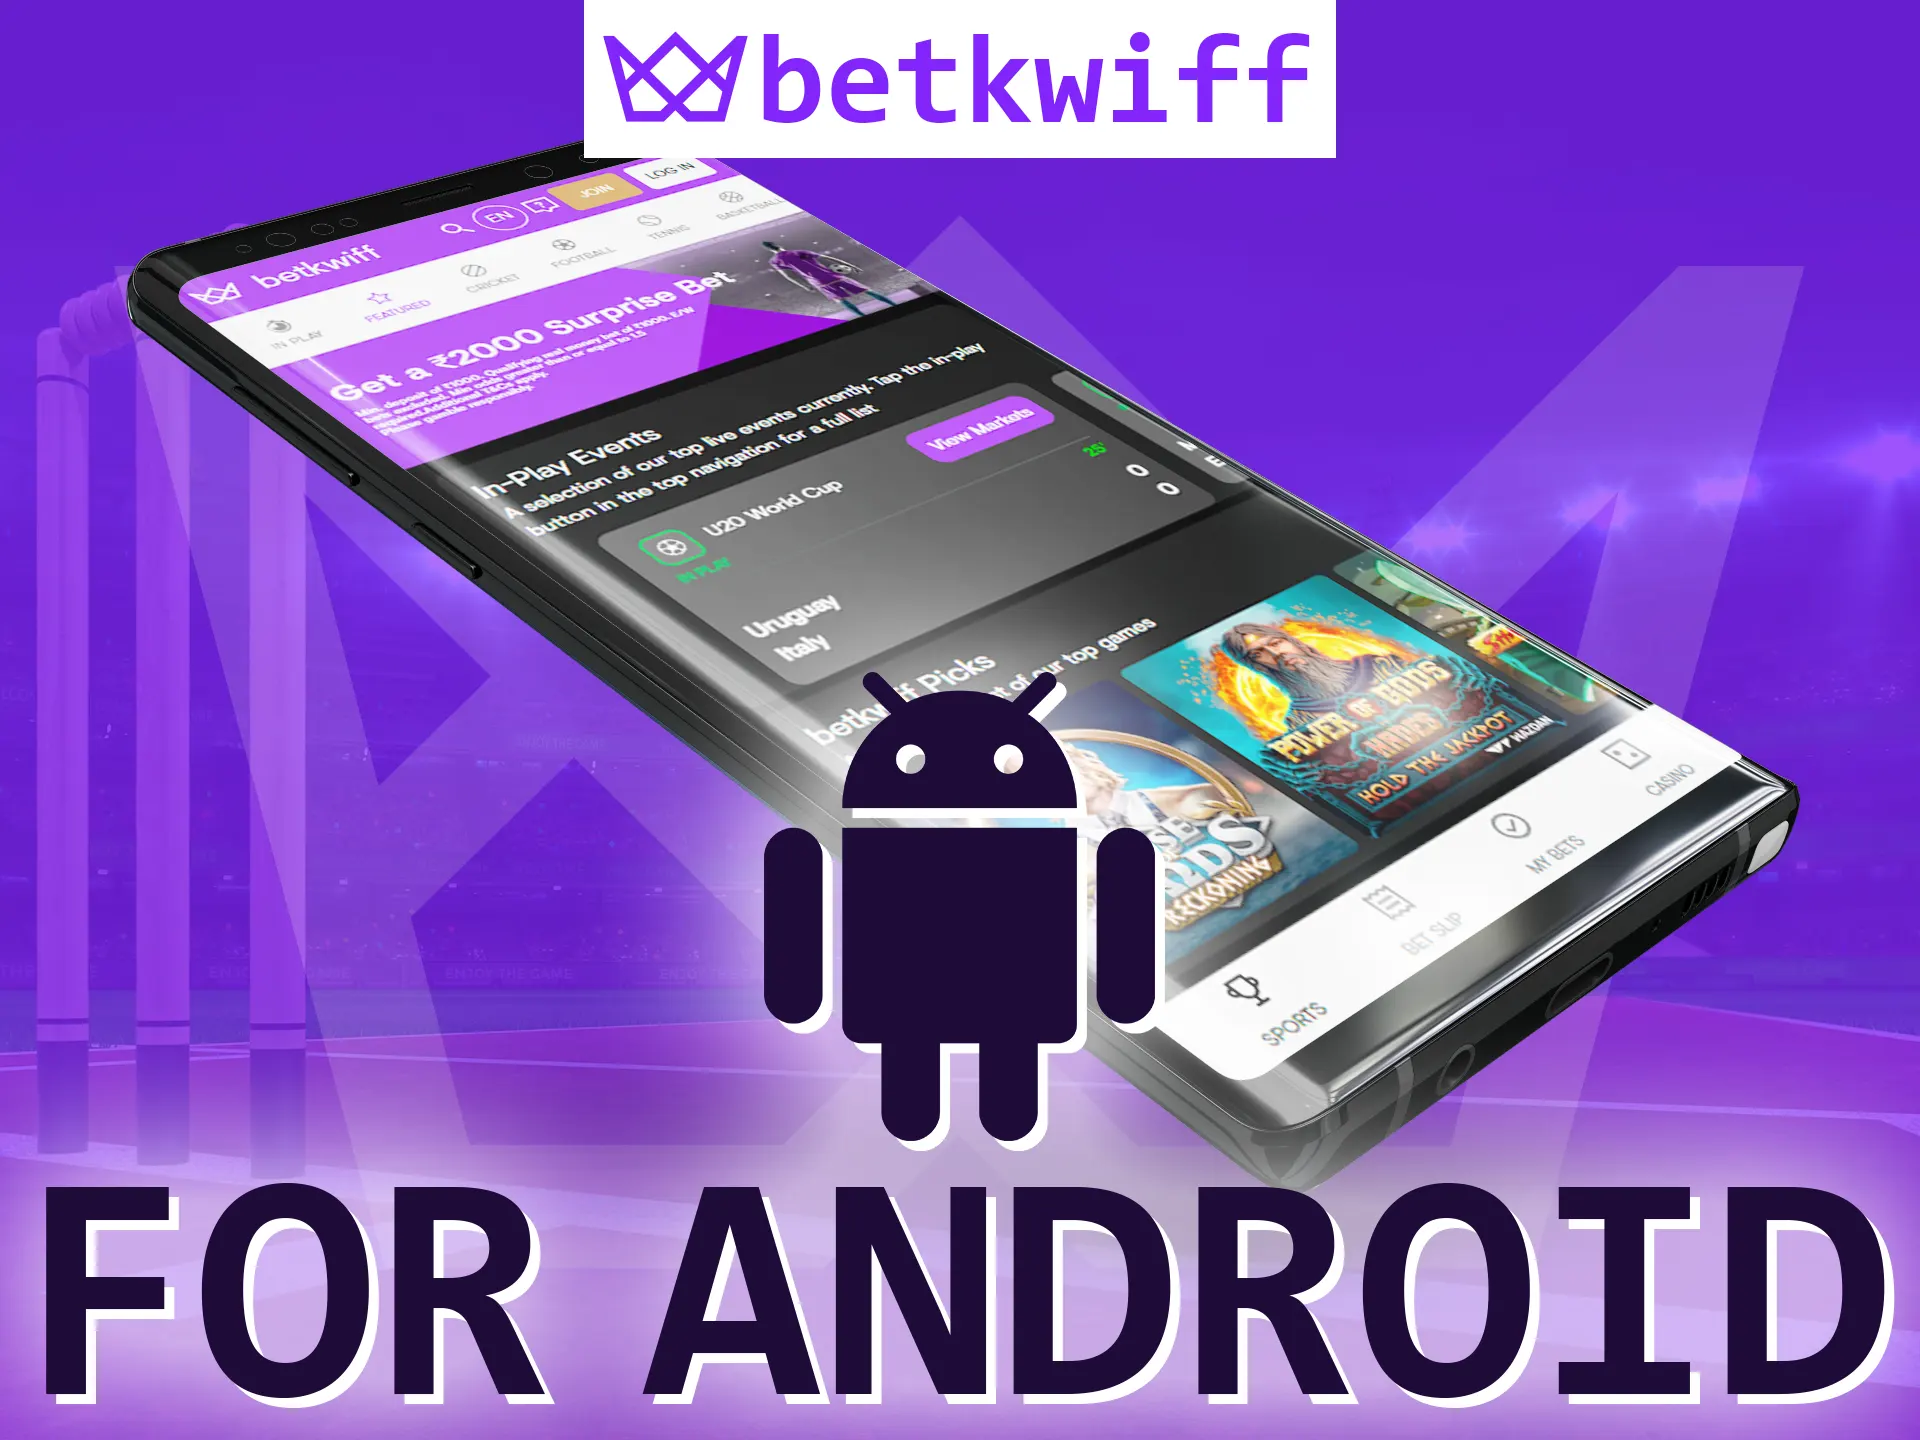 Install the Betkwiff app for Android.